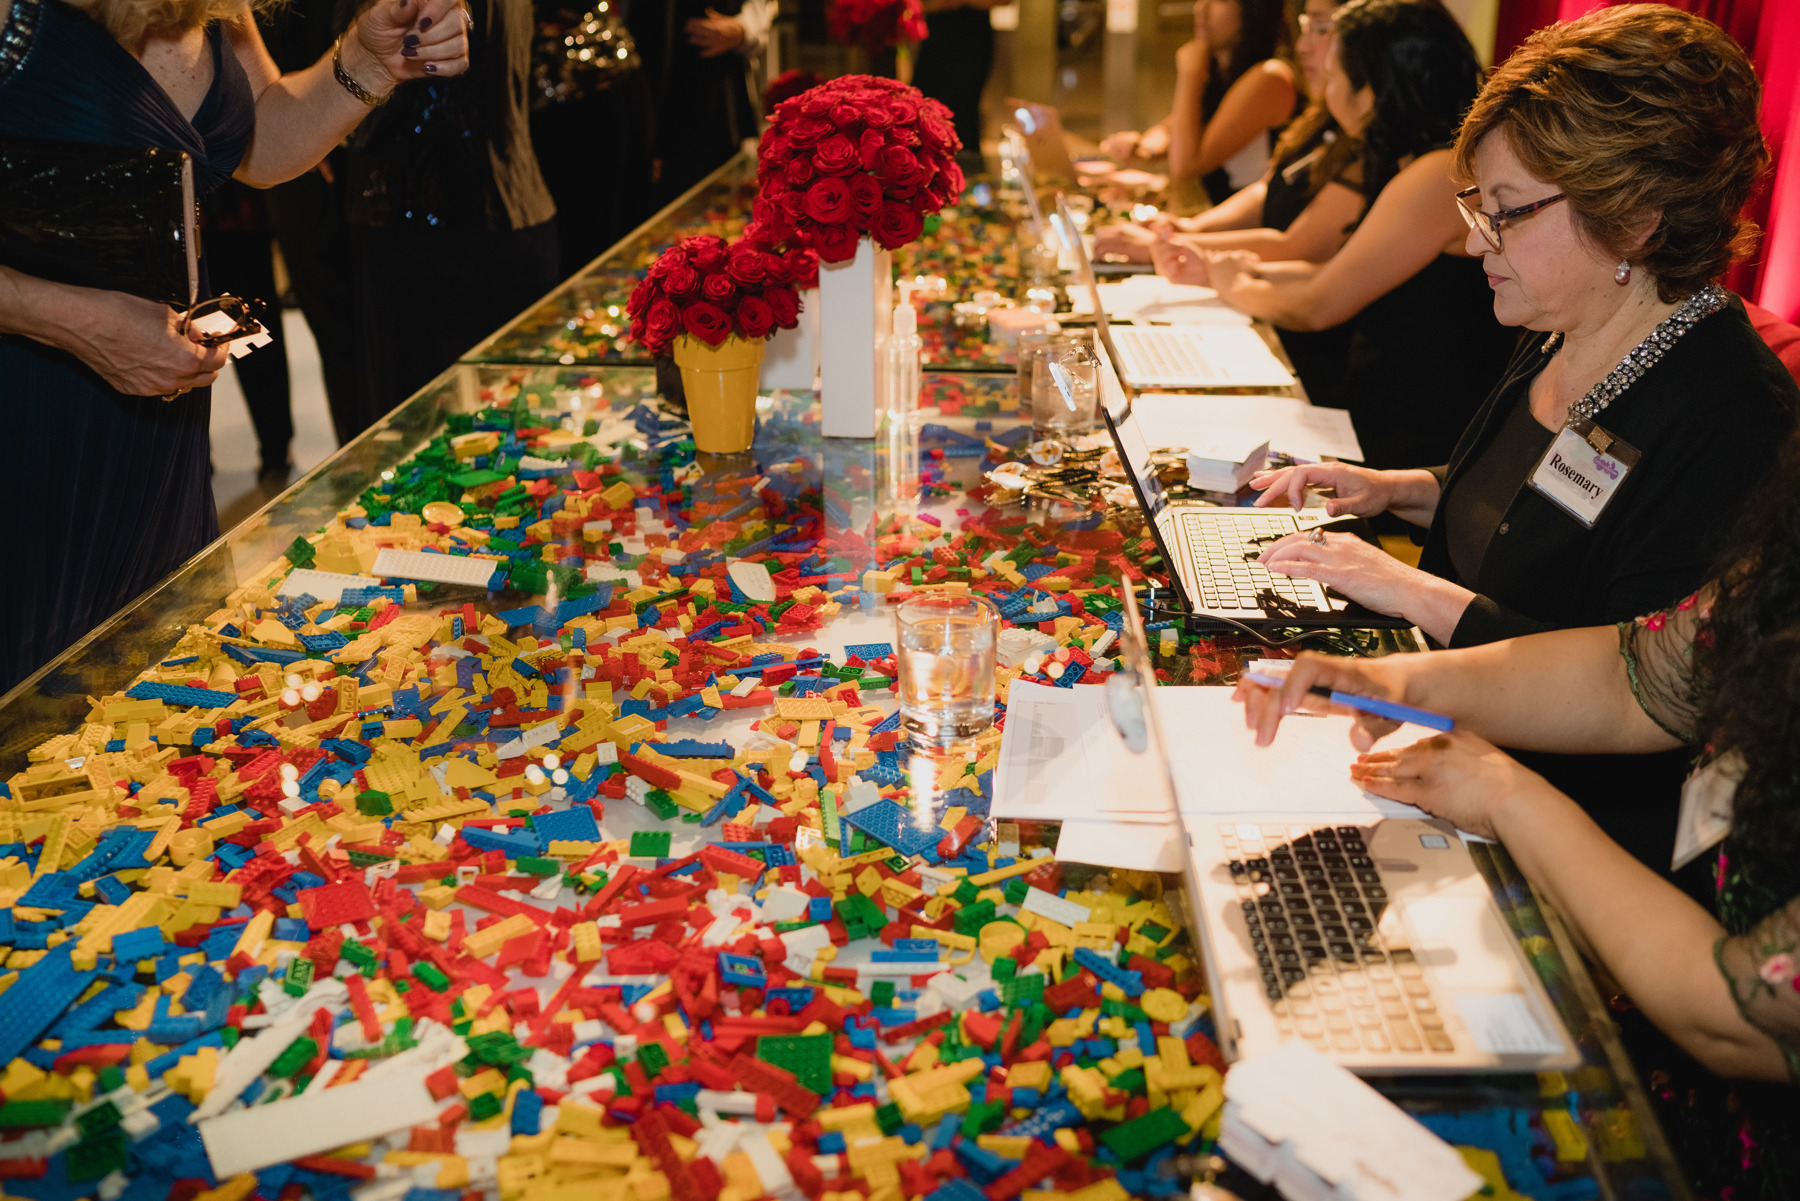 Discovery Ball registration staff working on laptops to check-in guests while sitting at long clear, acrylic table filled with hundreds of LEGO bricks in standard LEGO colors.